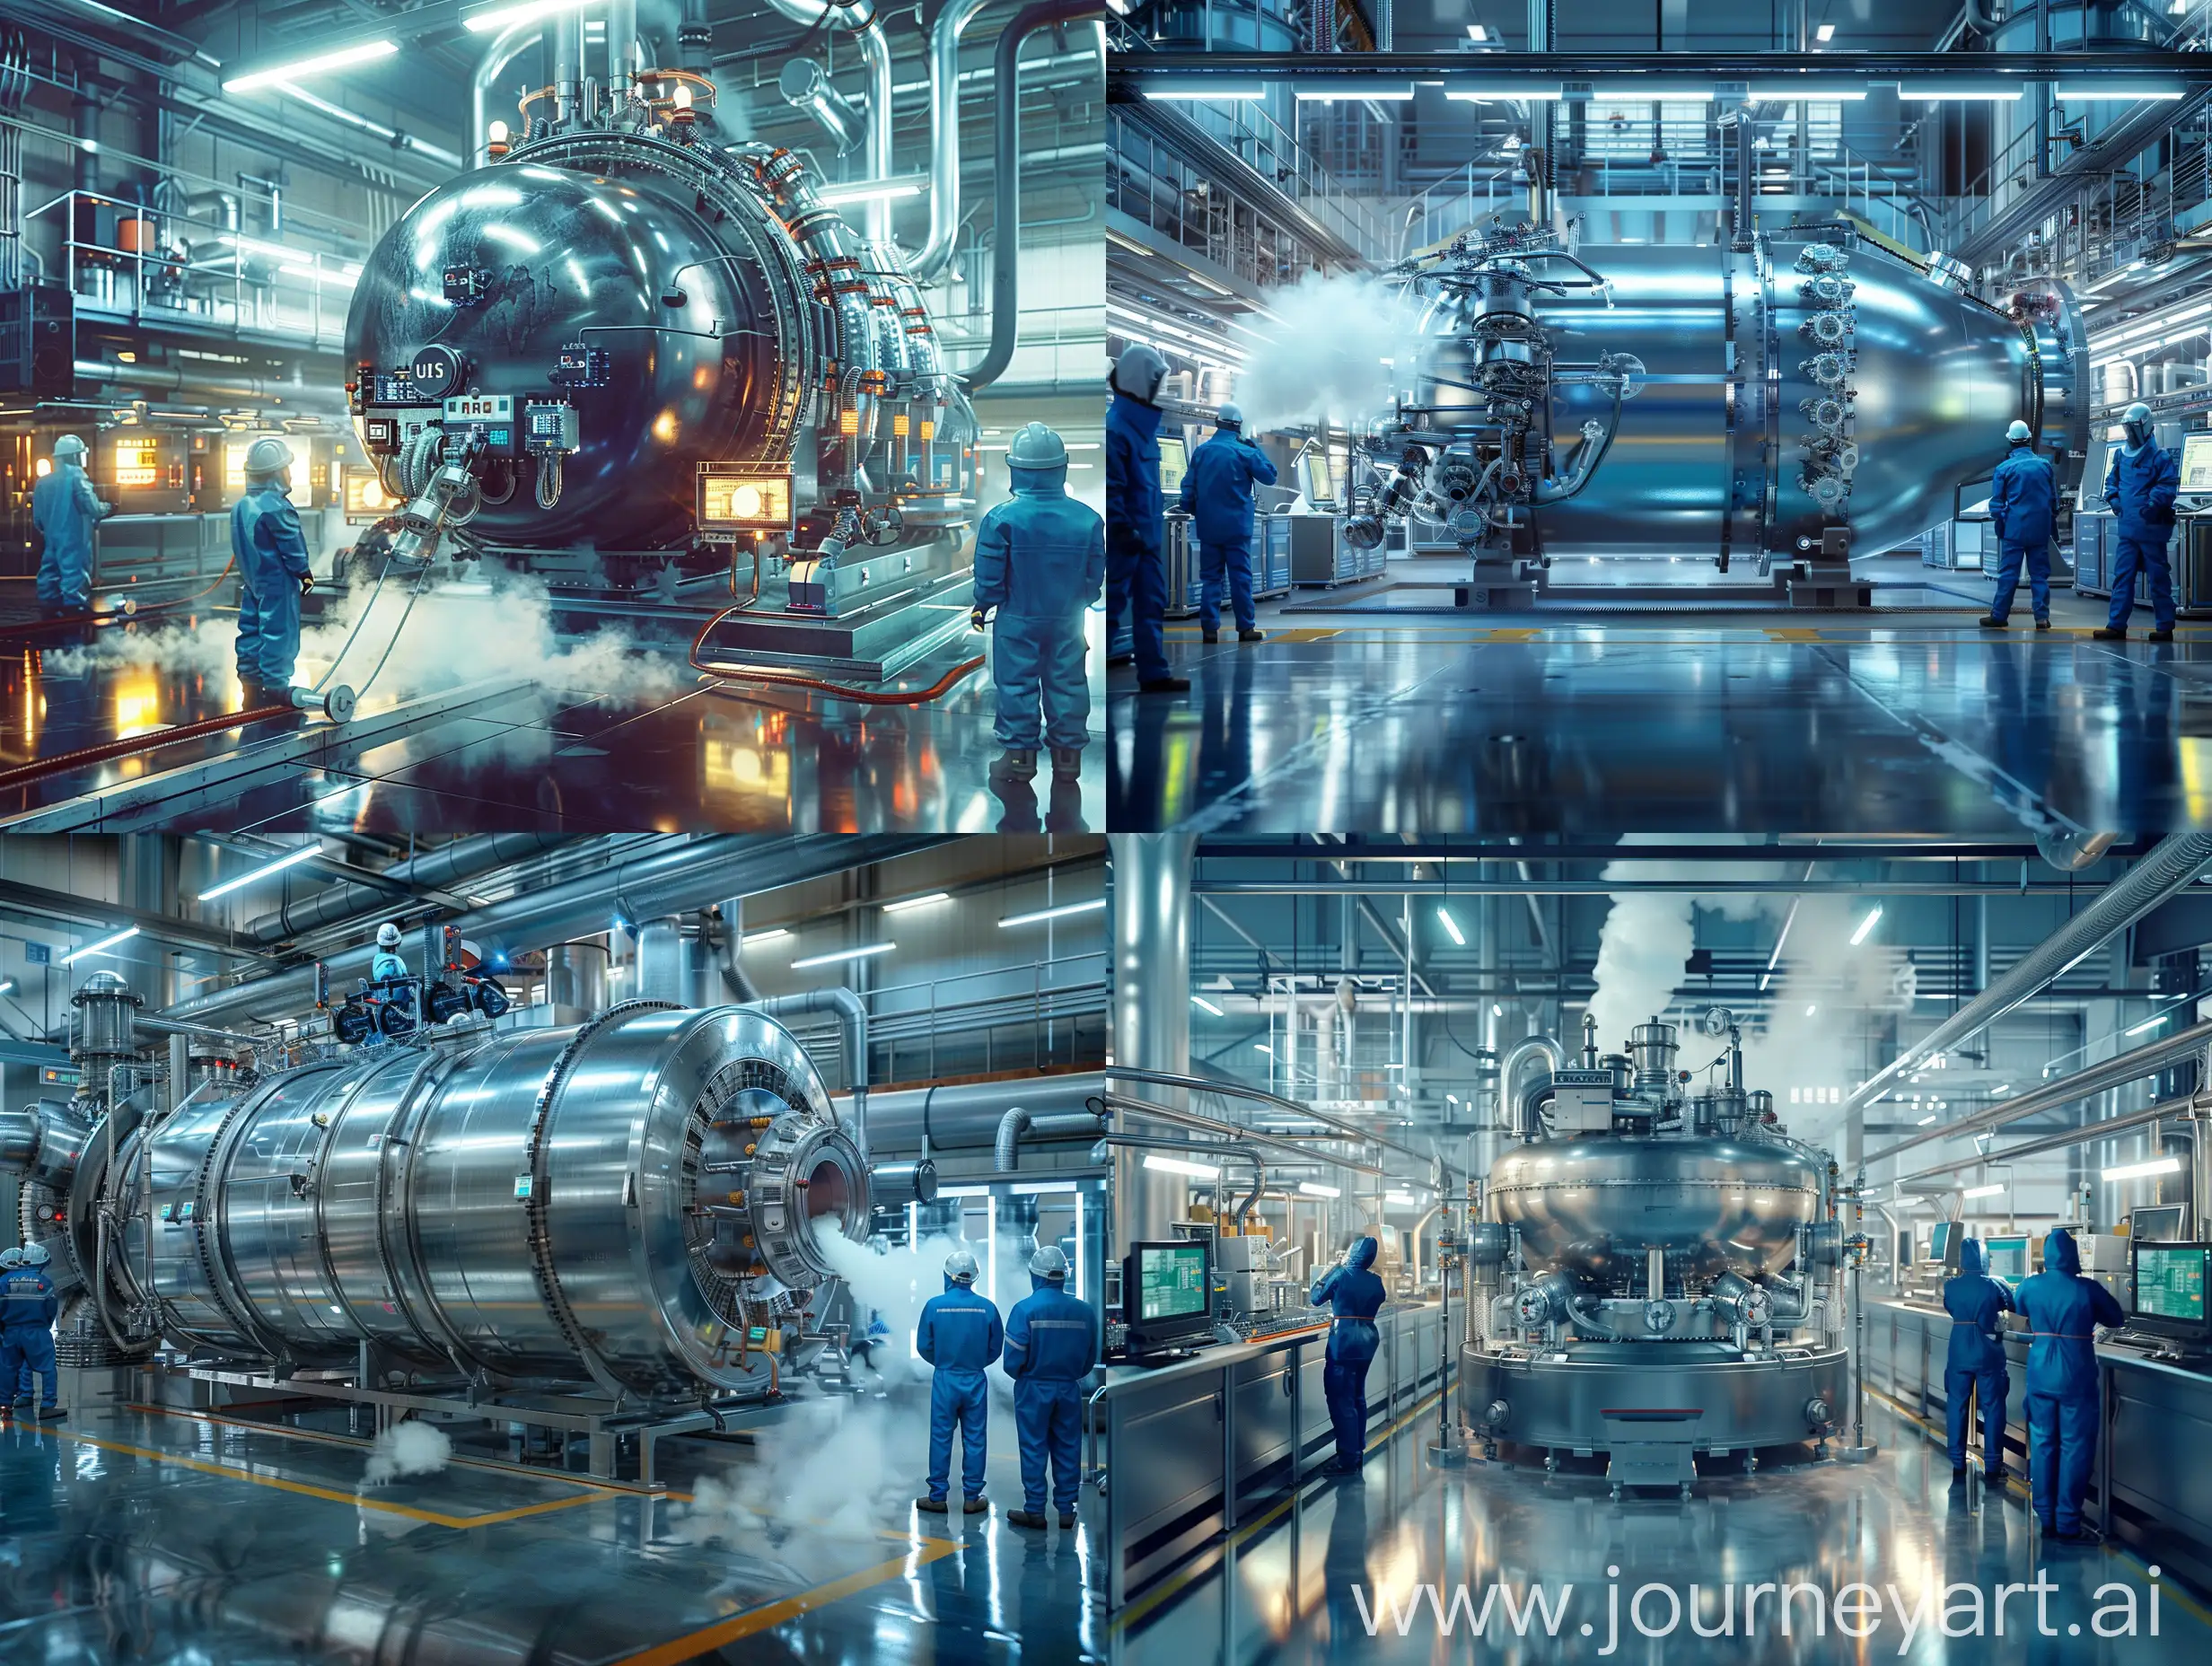 PHOTOGRAPHY ALCHEMY (masterpiece, UHD, photo-realistic:1.3), large stationary vacuum mixer, (metallic sheen, complex mechanisms:1.2), in operation, high-tech industrial setting, (production line, glossy floor:1.1), several workers in protective gear, observing process, (blue overalls, safety helmets:1.2), glowing monitors, intricate pipelines, white smoke gently rising, cool colors, diagonal shot, vibrant, looking at viewer, product innovation, precision, best quality